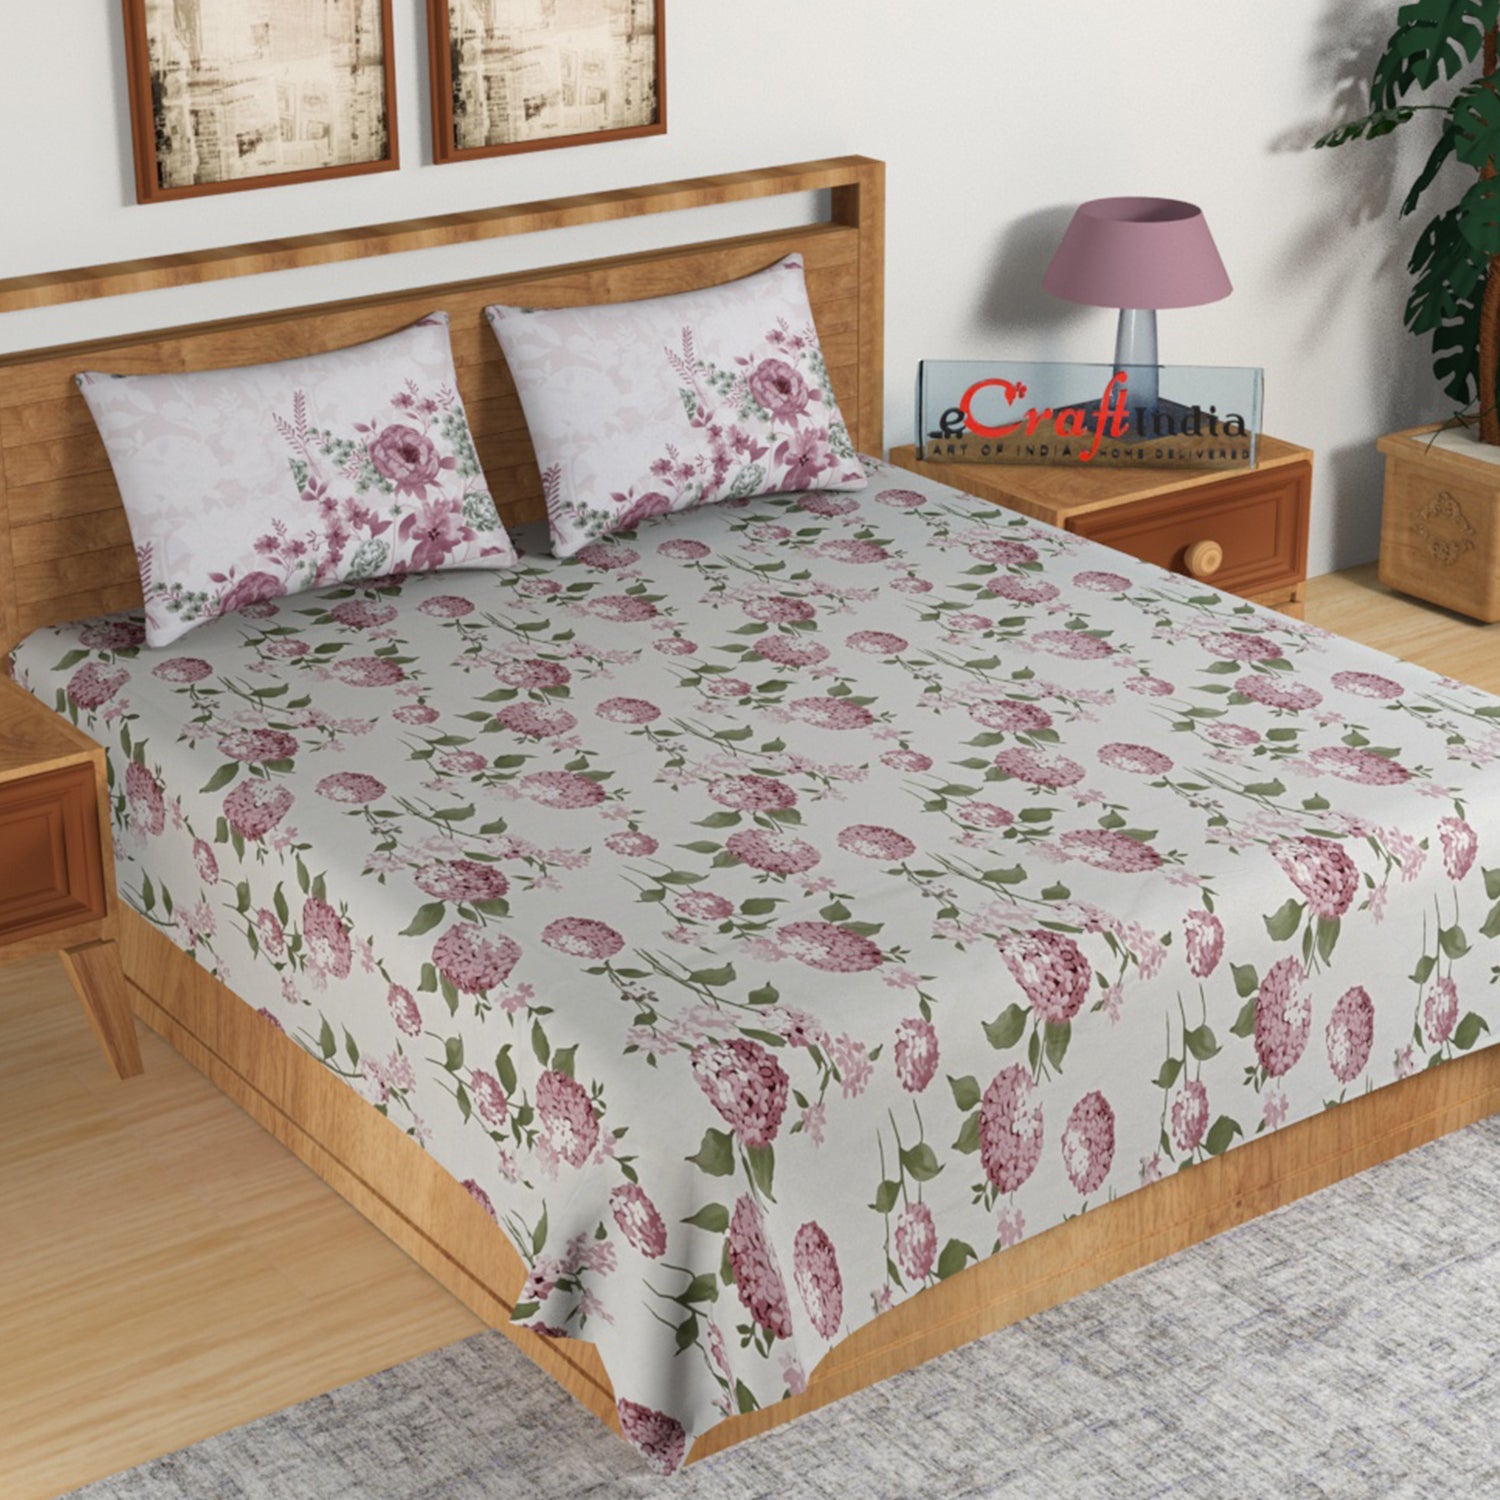 Pink Floral Print 144 TC Cotton Double Bedsheet (90" x 108") with 2 pillow cover